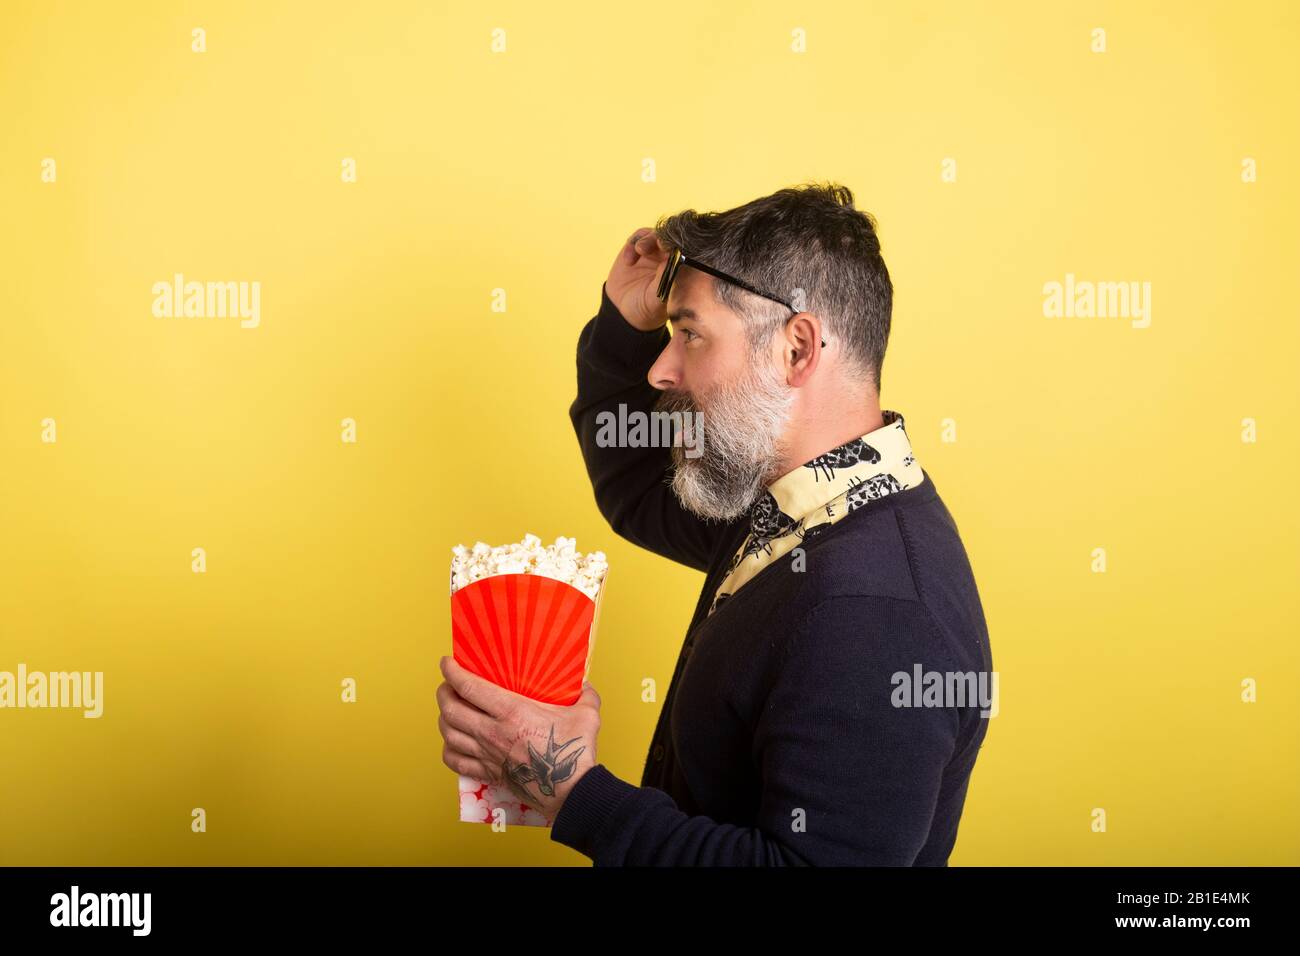 Handsome man with camera profile sunglasses holding a box full of popcorn on yellow background. Stock Photo